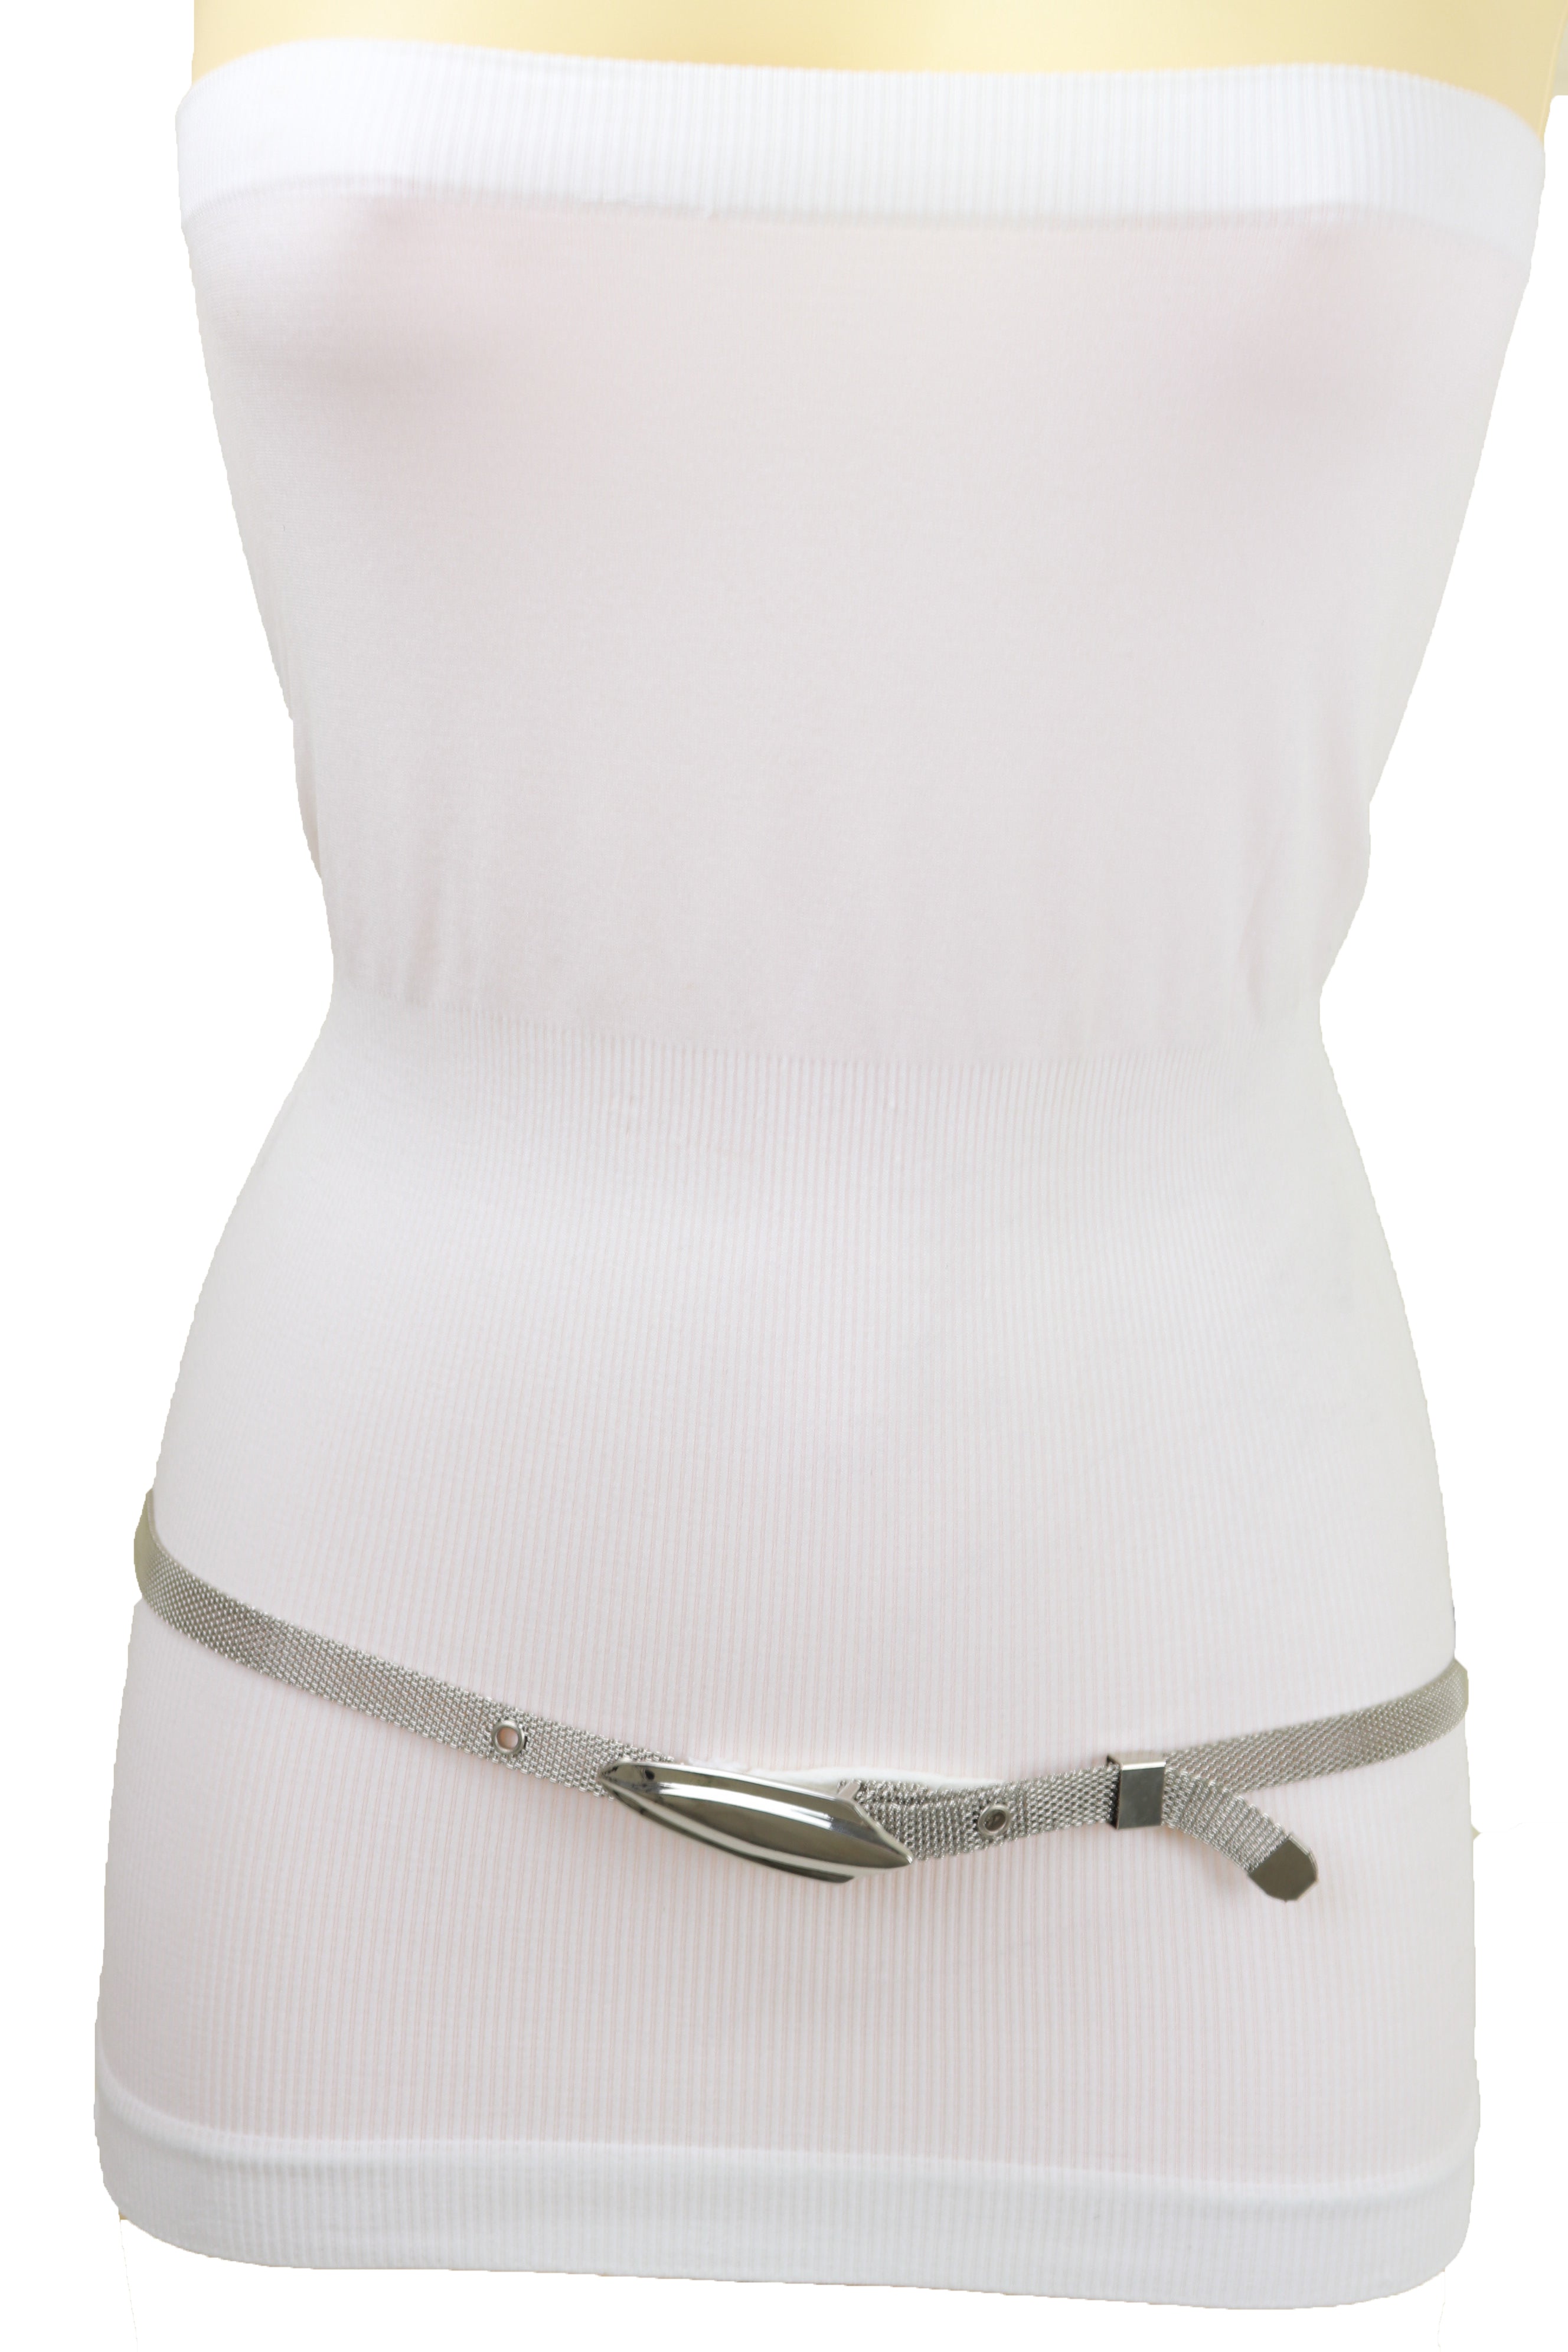 Women Silver Metal Chain Links Waistband Fashion Belt Adjustable Size Fit S  M L